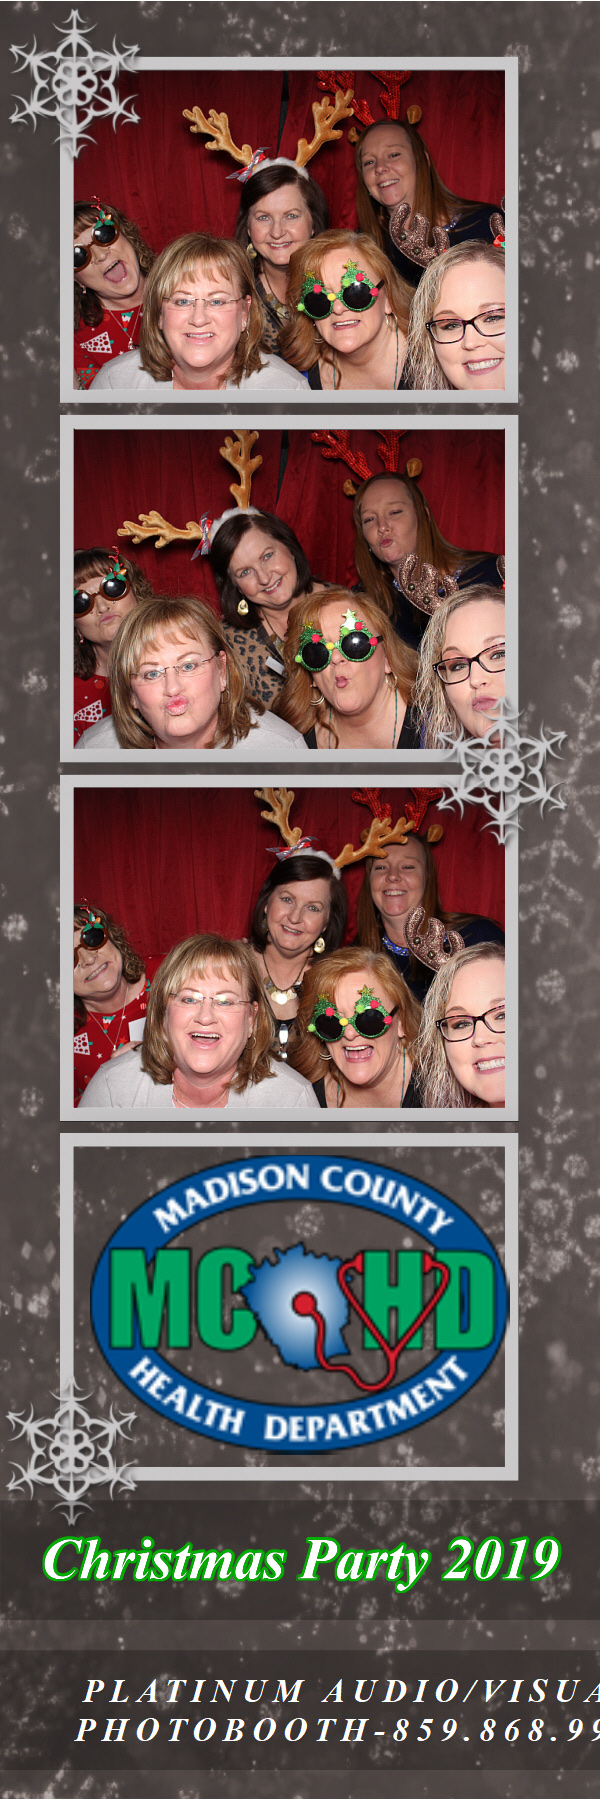 Madison County Health Department Christmas Party 2019